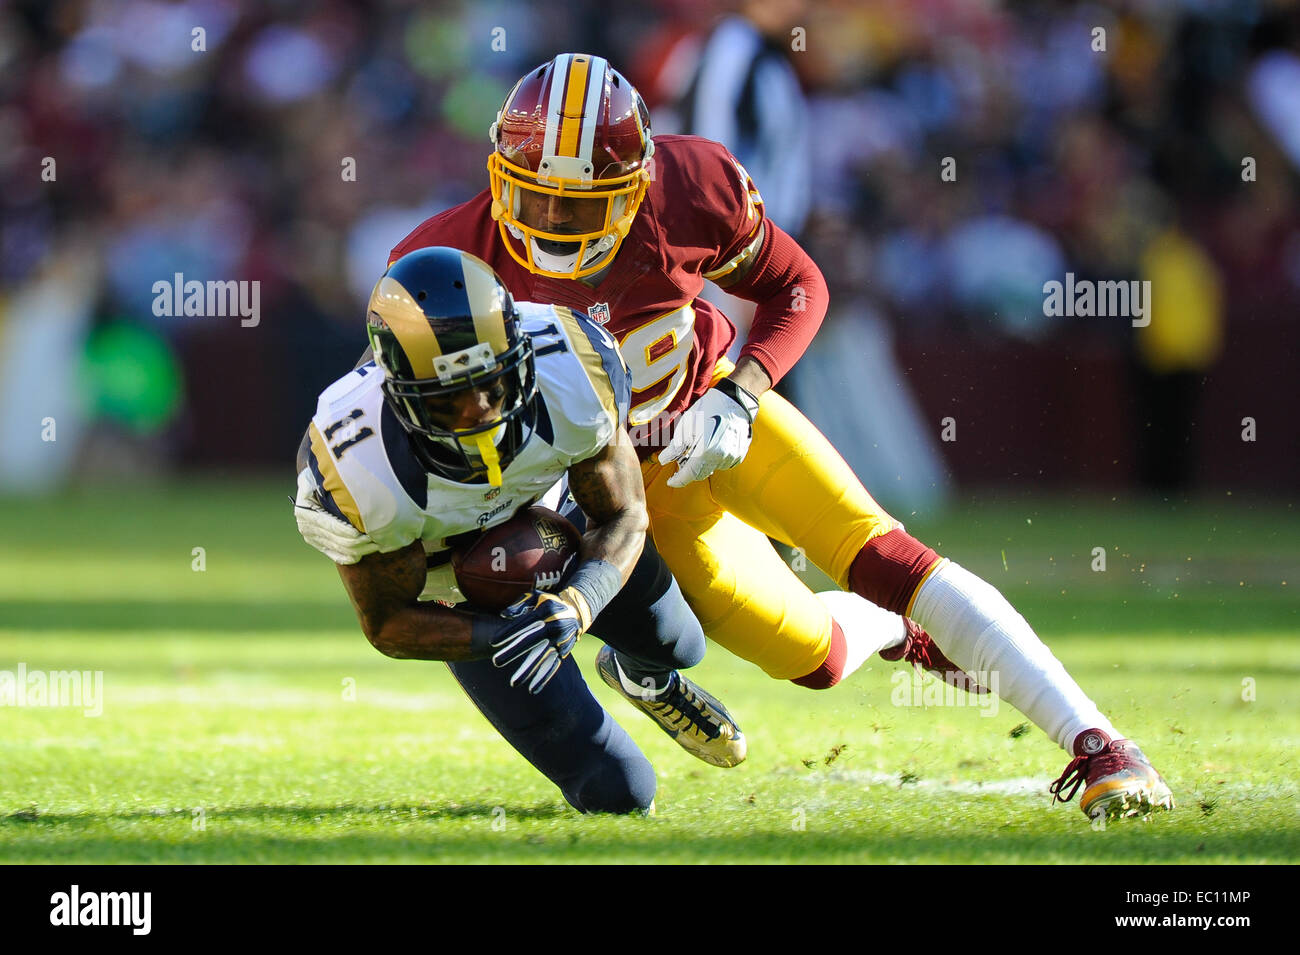 Landover, Maryland, USA. 07th Dec, 2014. Washington Redskins cornerback David Amerson (39) tackles St. Louis Rams wide receiver Tavon Austin (11) from behind during the matchup between the St. Louis Rams and the Washington Redskins at FedEx Field in Landover, MD. Credit:  Cal Sport Media/Alamy Live News Stock Photo